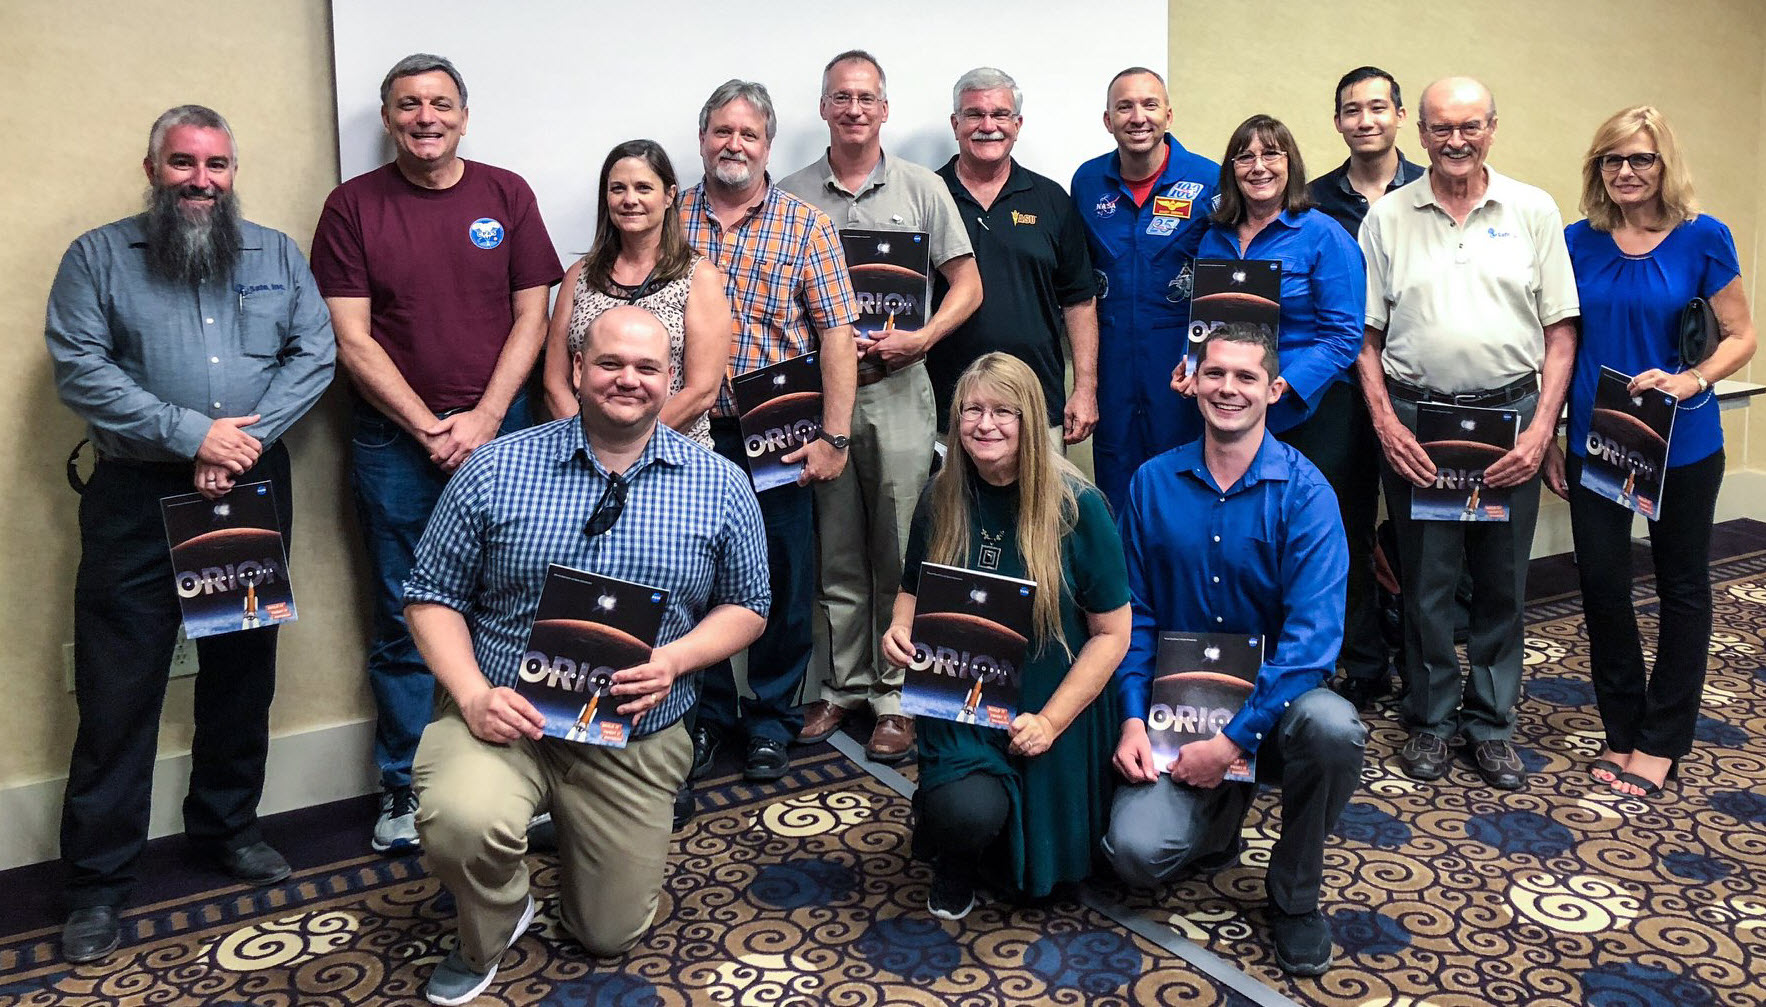 Safe team with NASA Orion Program Manager Mark Kirasich (back row, second from left) and NASA astronaut Randy Breznik (back row, fifth from right), at a special NASA/YPG meet-and-greet gathering, the day before the Orion parachute drop testing | Photo credit: NASA